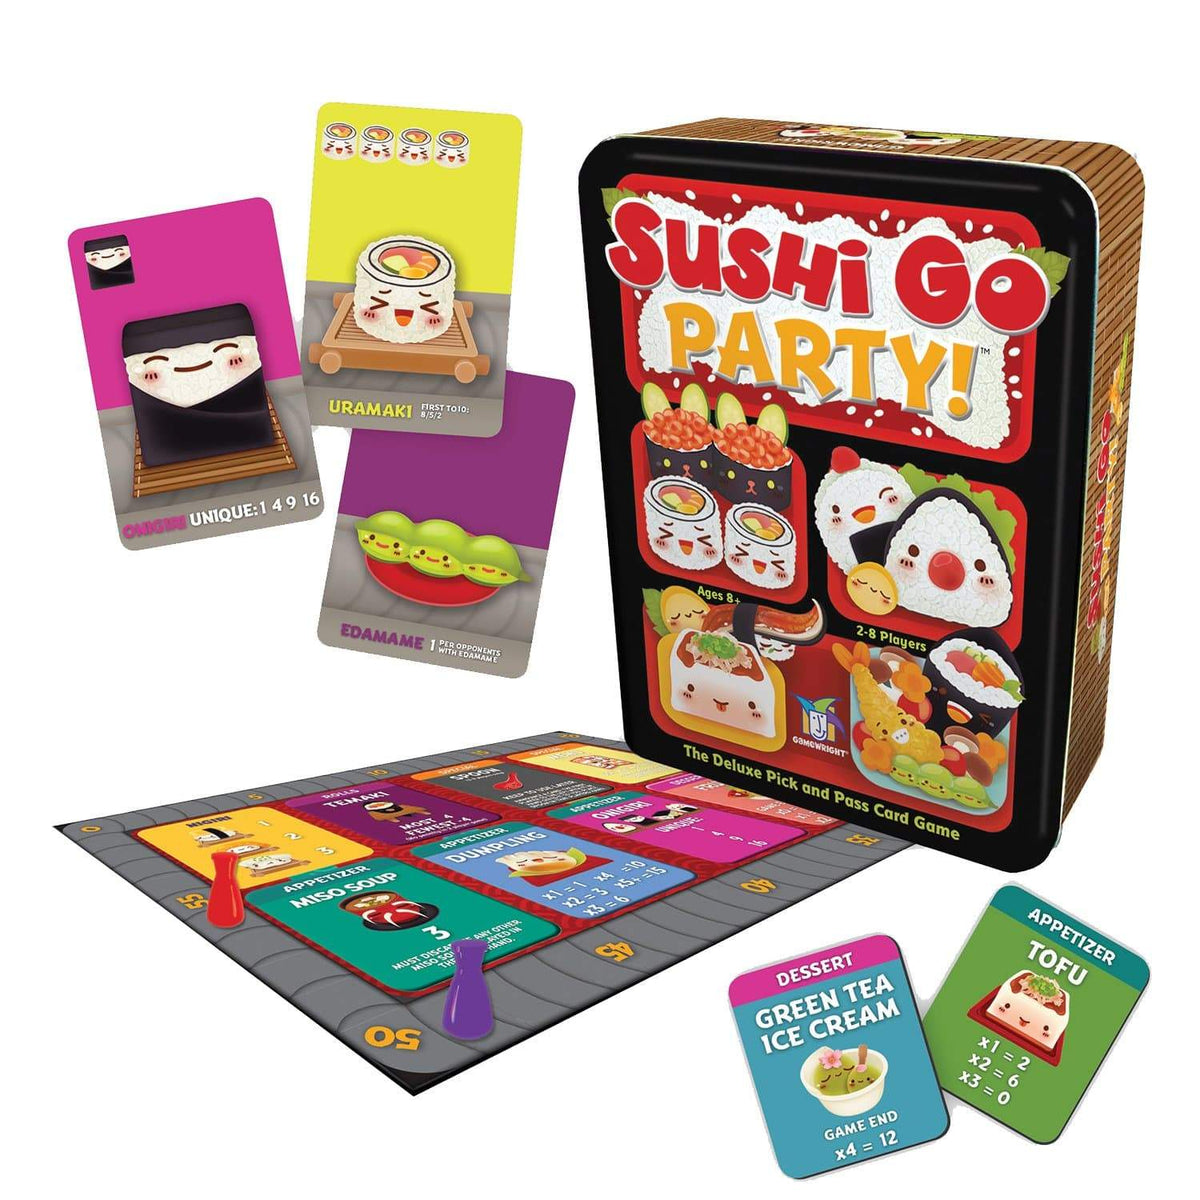 Sushi Go Party! Alliance Games Board Games